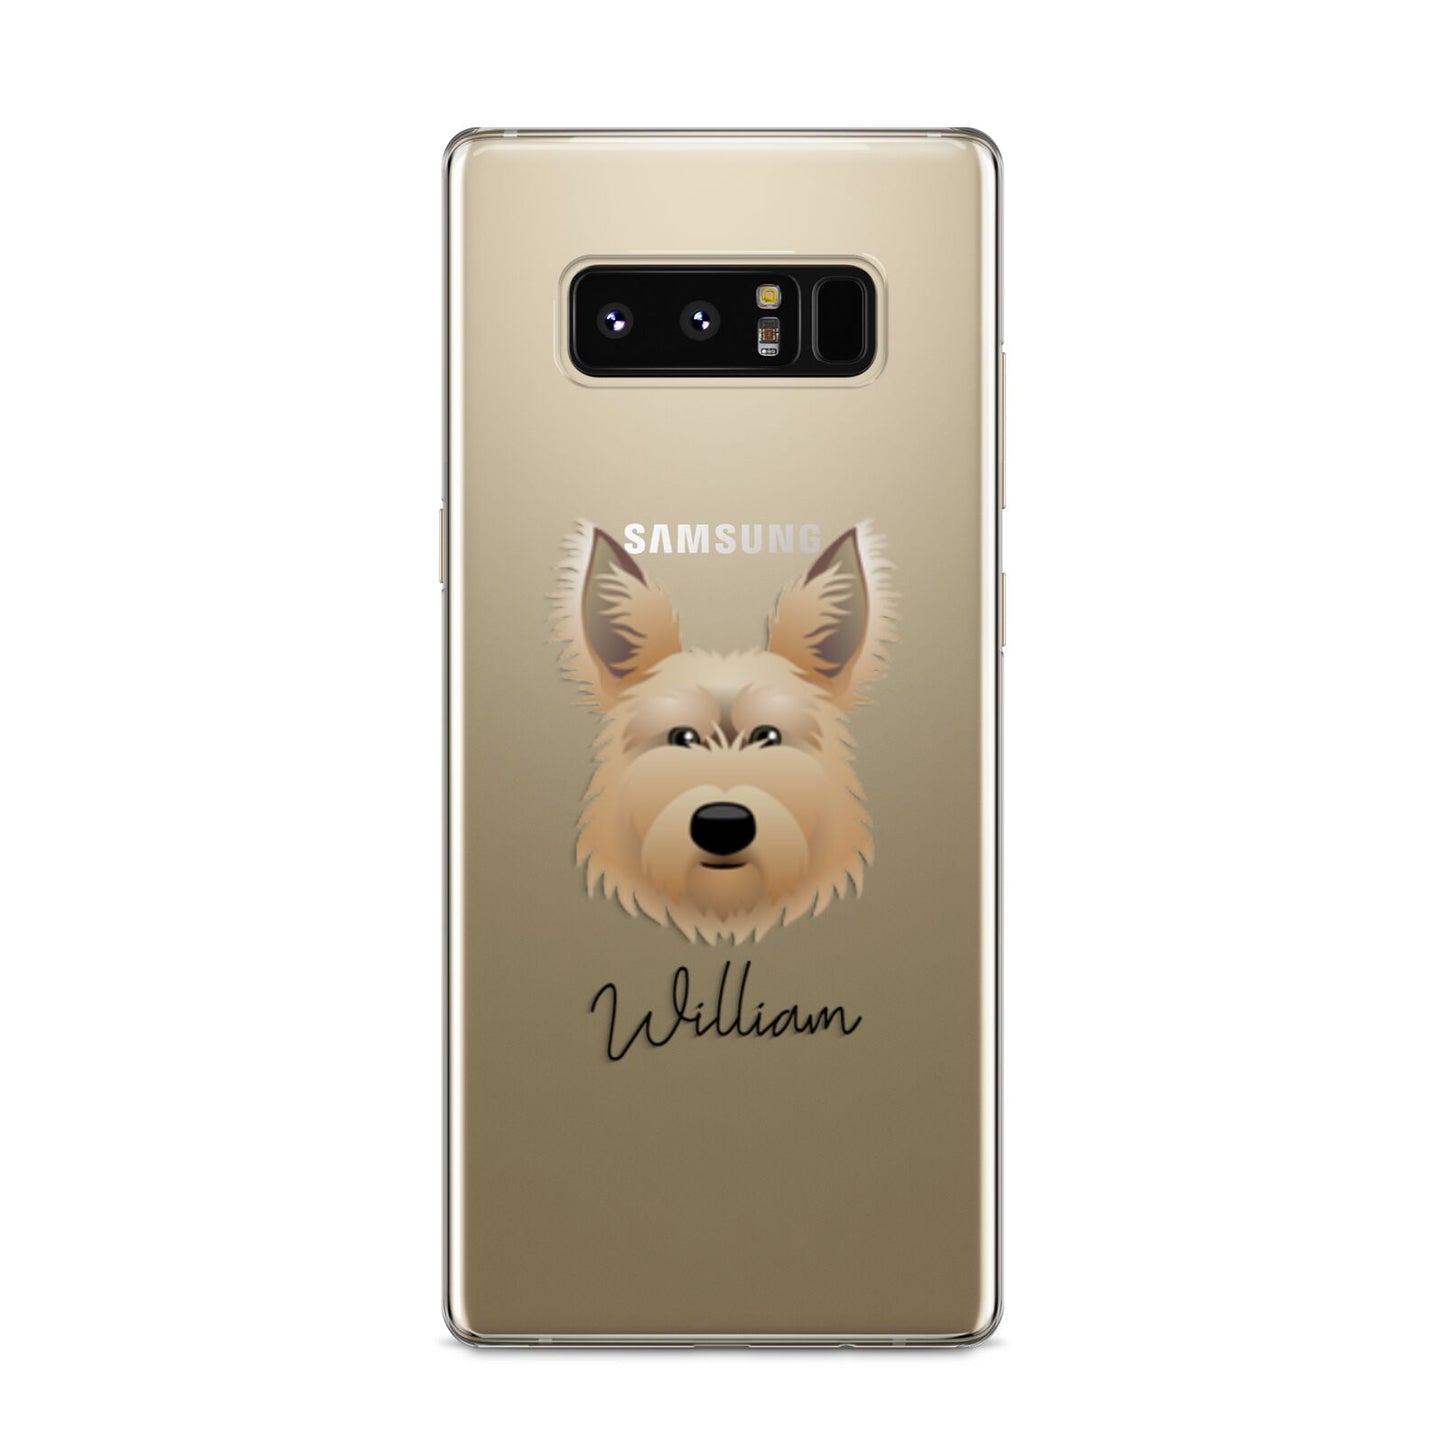 Picardy Sheepdog Personalised Samsung Galaxy S8 Case